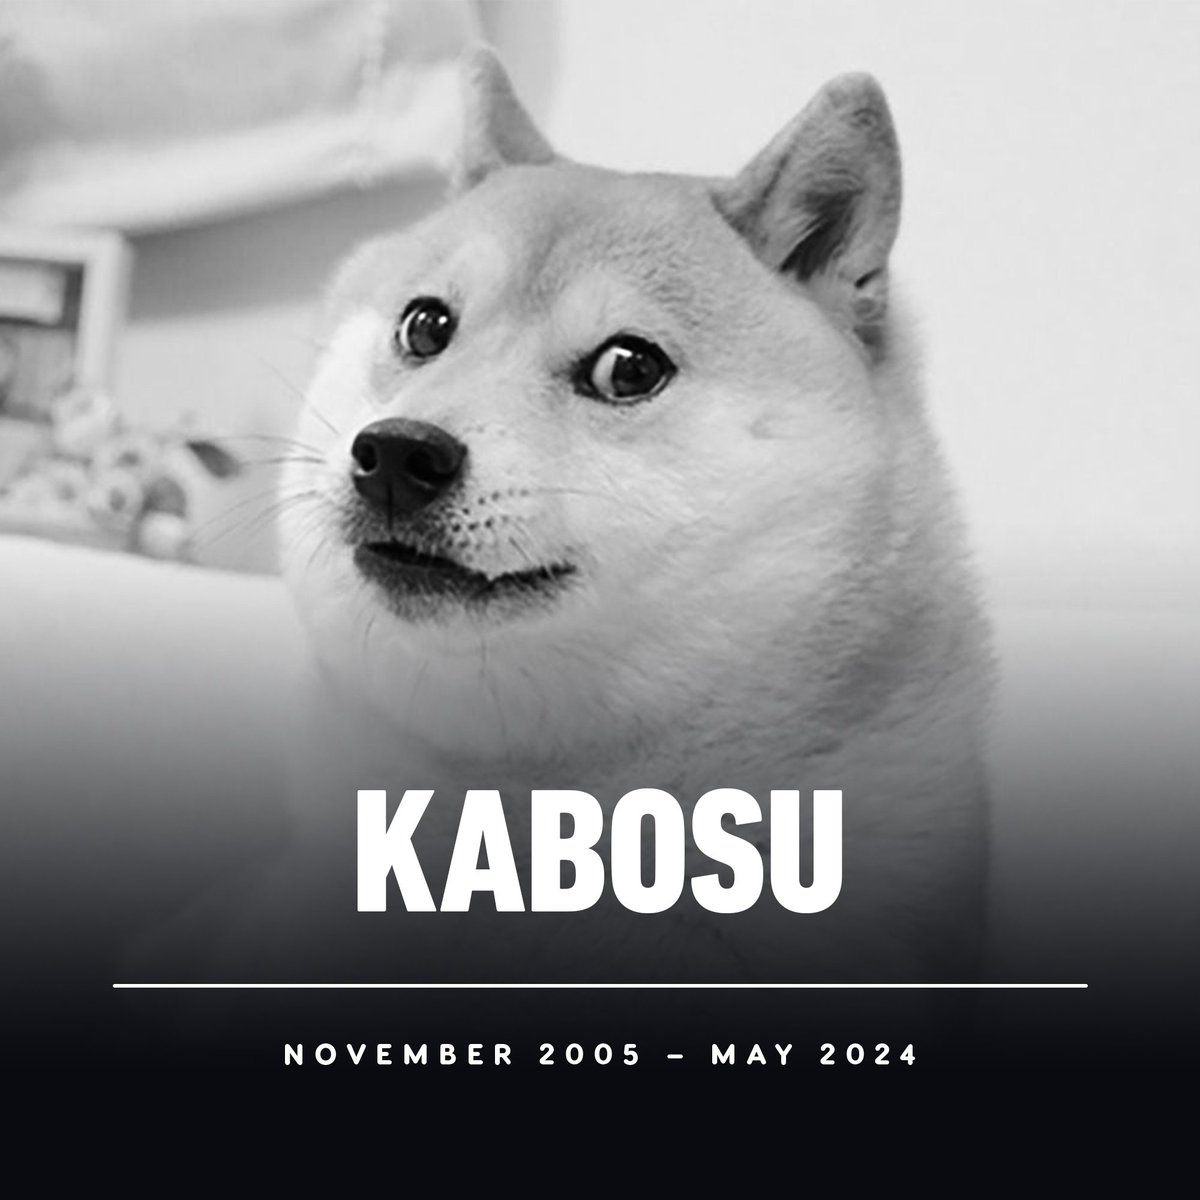 Kabosu, the iconic Shiba Inu that inspired countless Doge memes, has died aged 18.